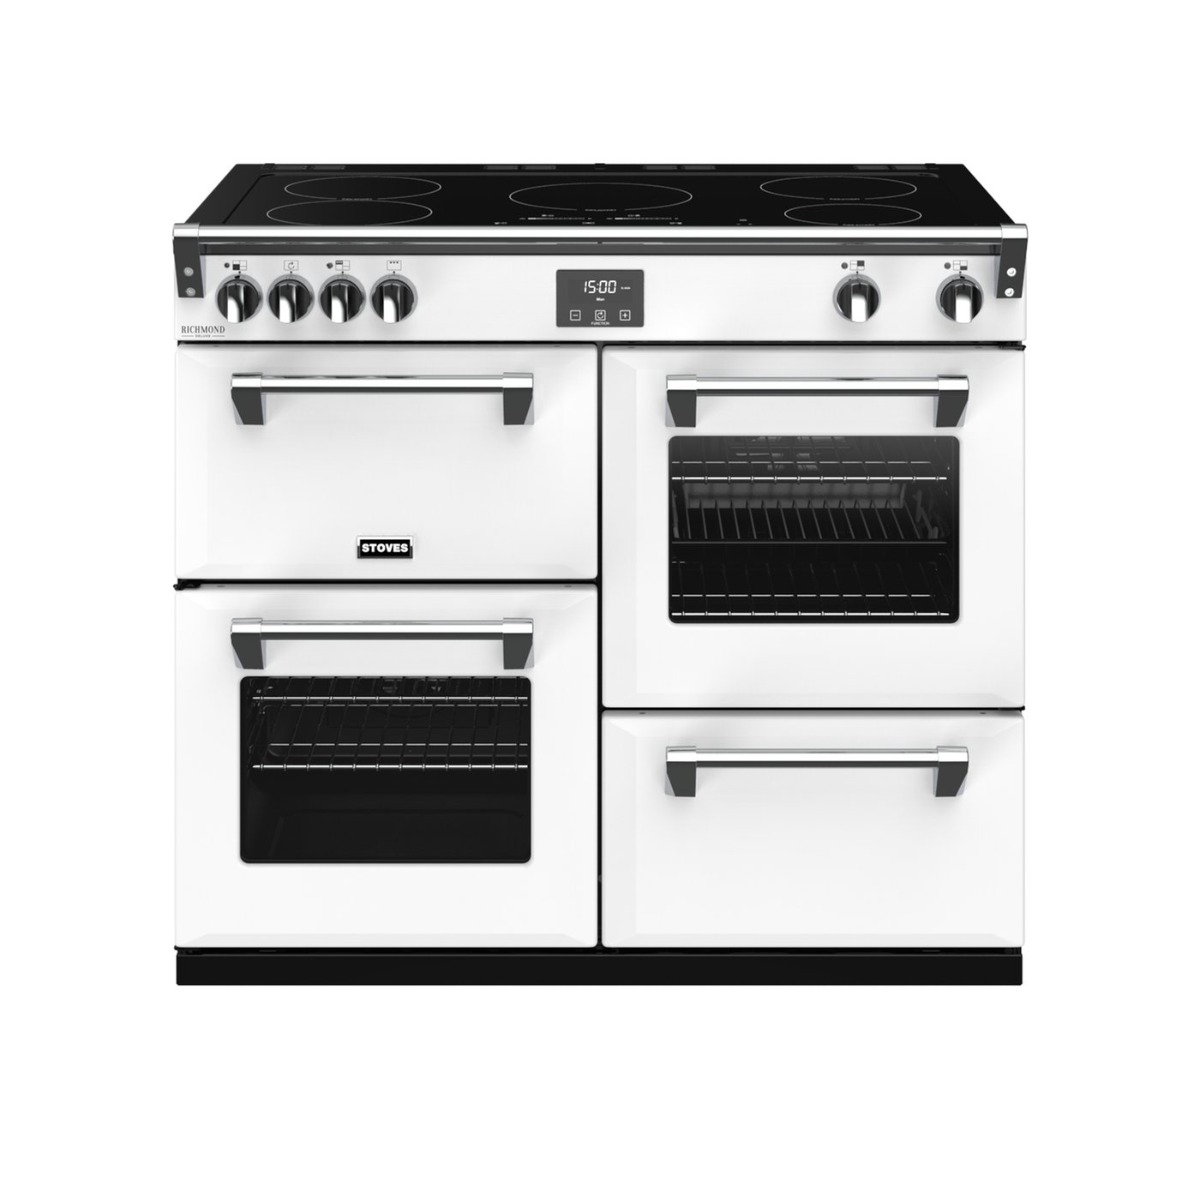 Stoves RCHDXS1000EICBIWH Richmond Deluxe 100cm Induction CB Range Cooker - Icy White